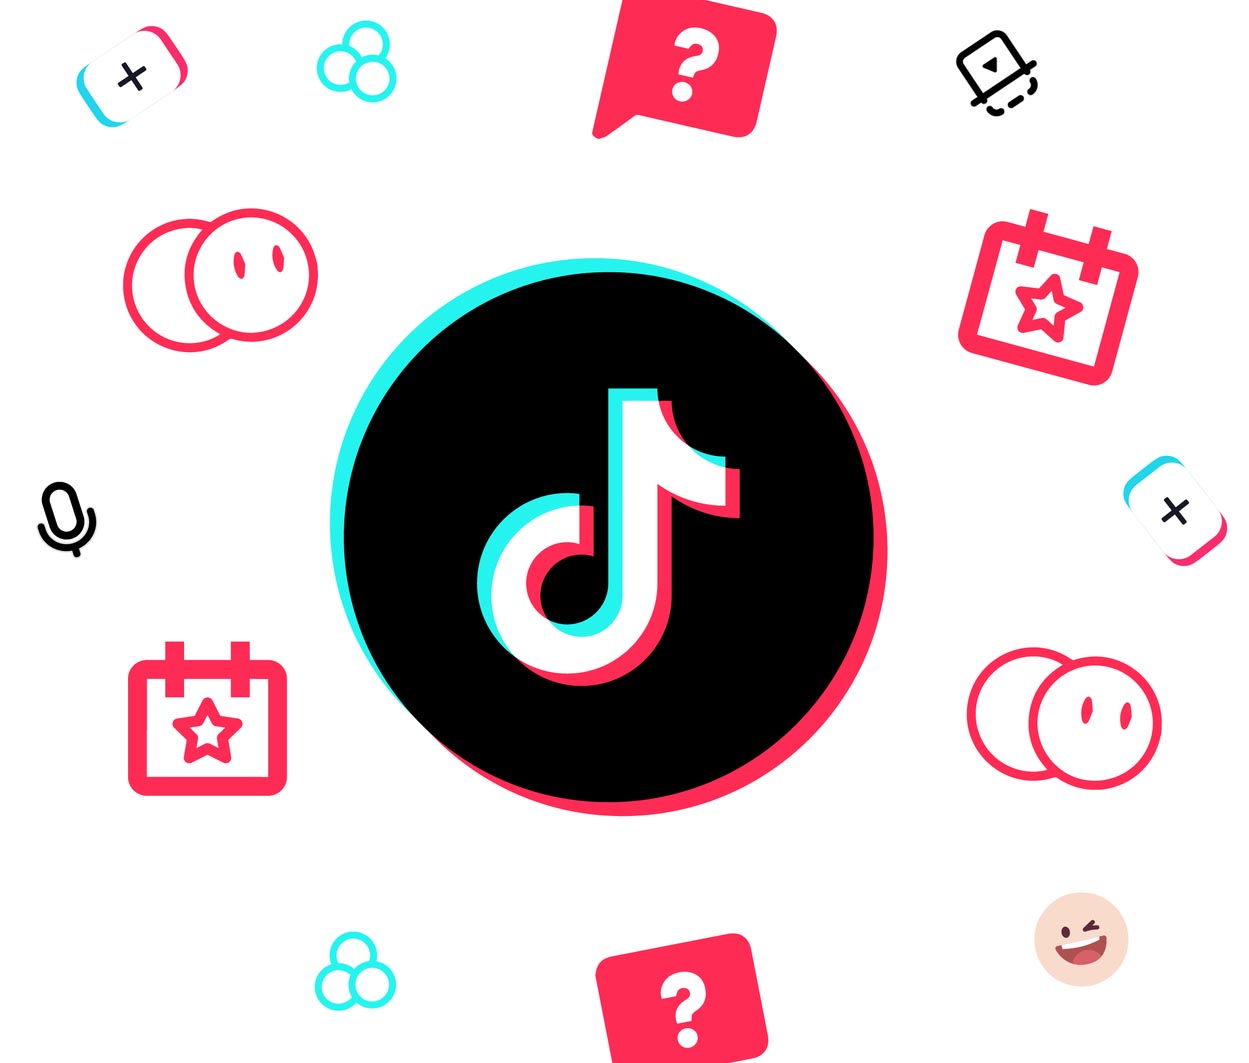 TikTok Strengthens Its Safety Features To Protect Younger Users On The App